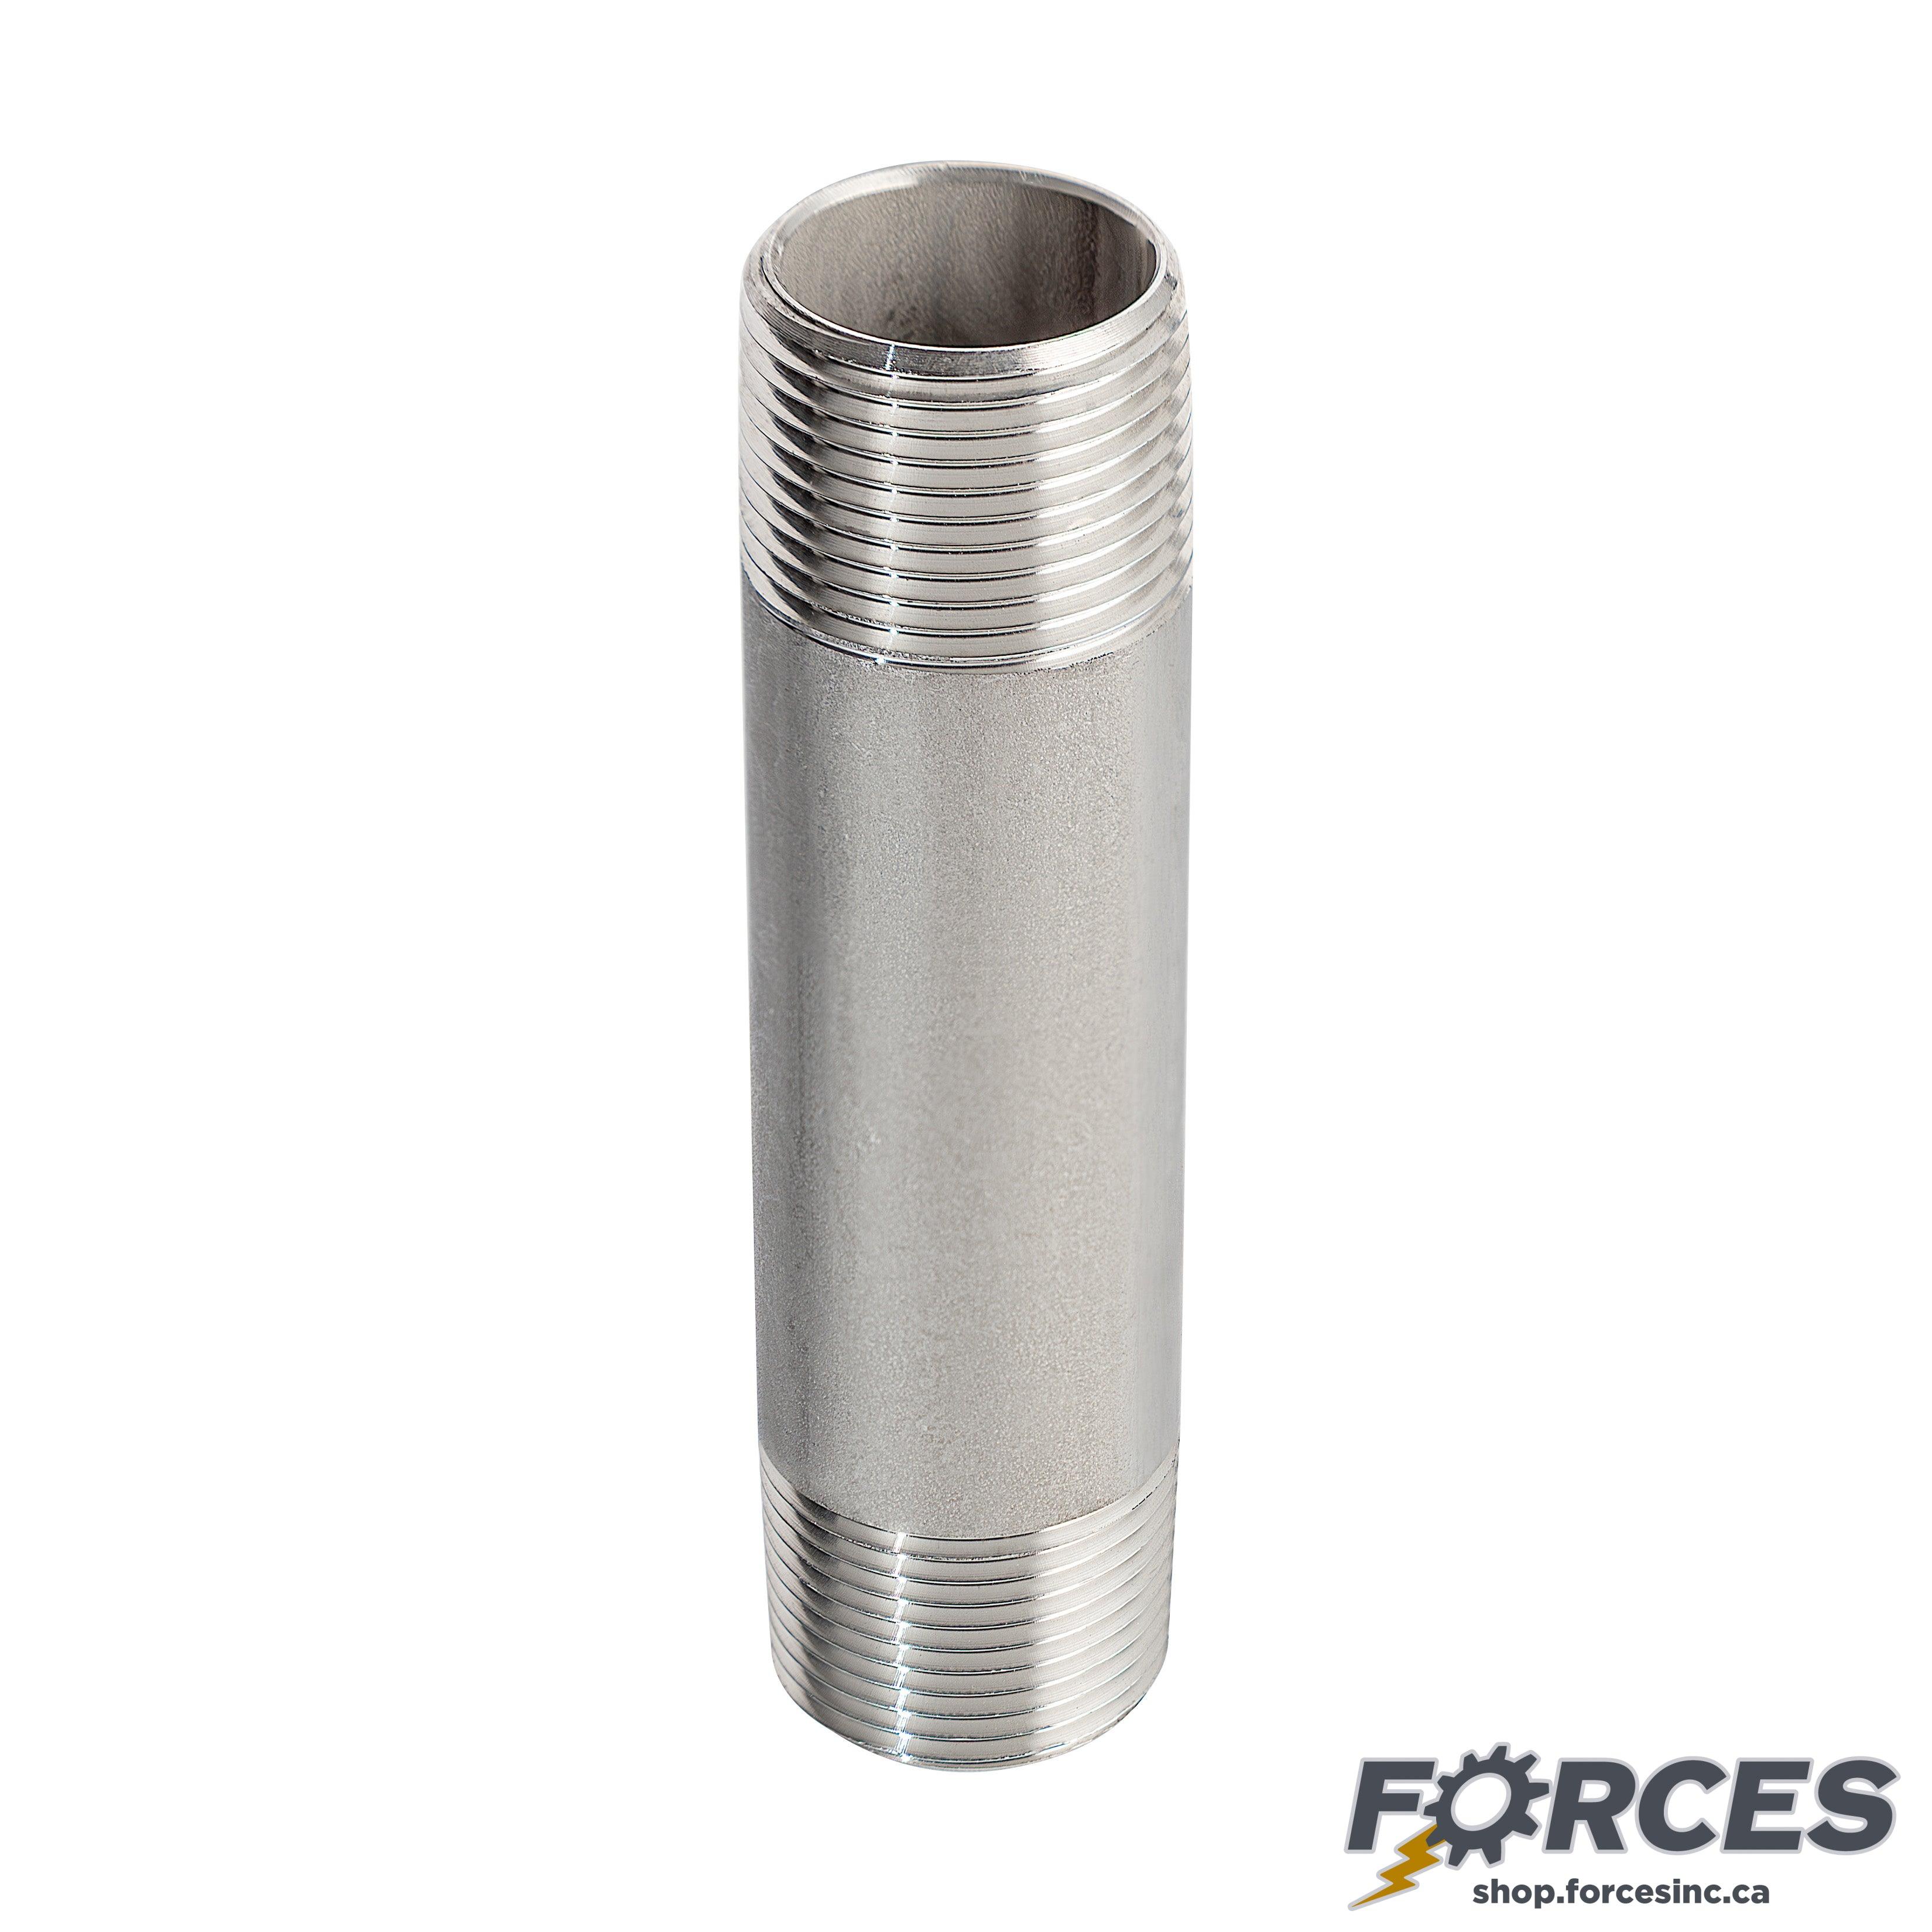 1/2" X 4" Long Nipple - Stainless Steel 316 - Forces Inc